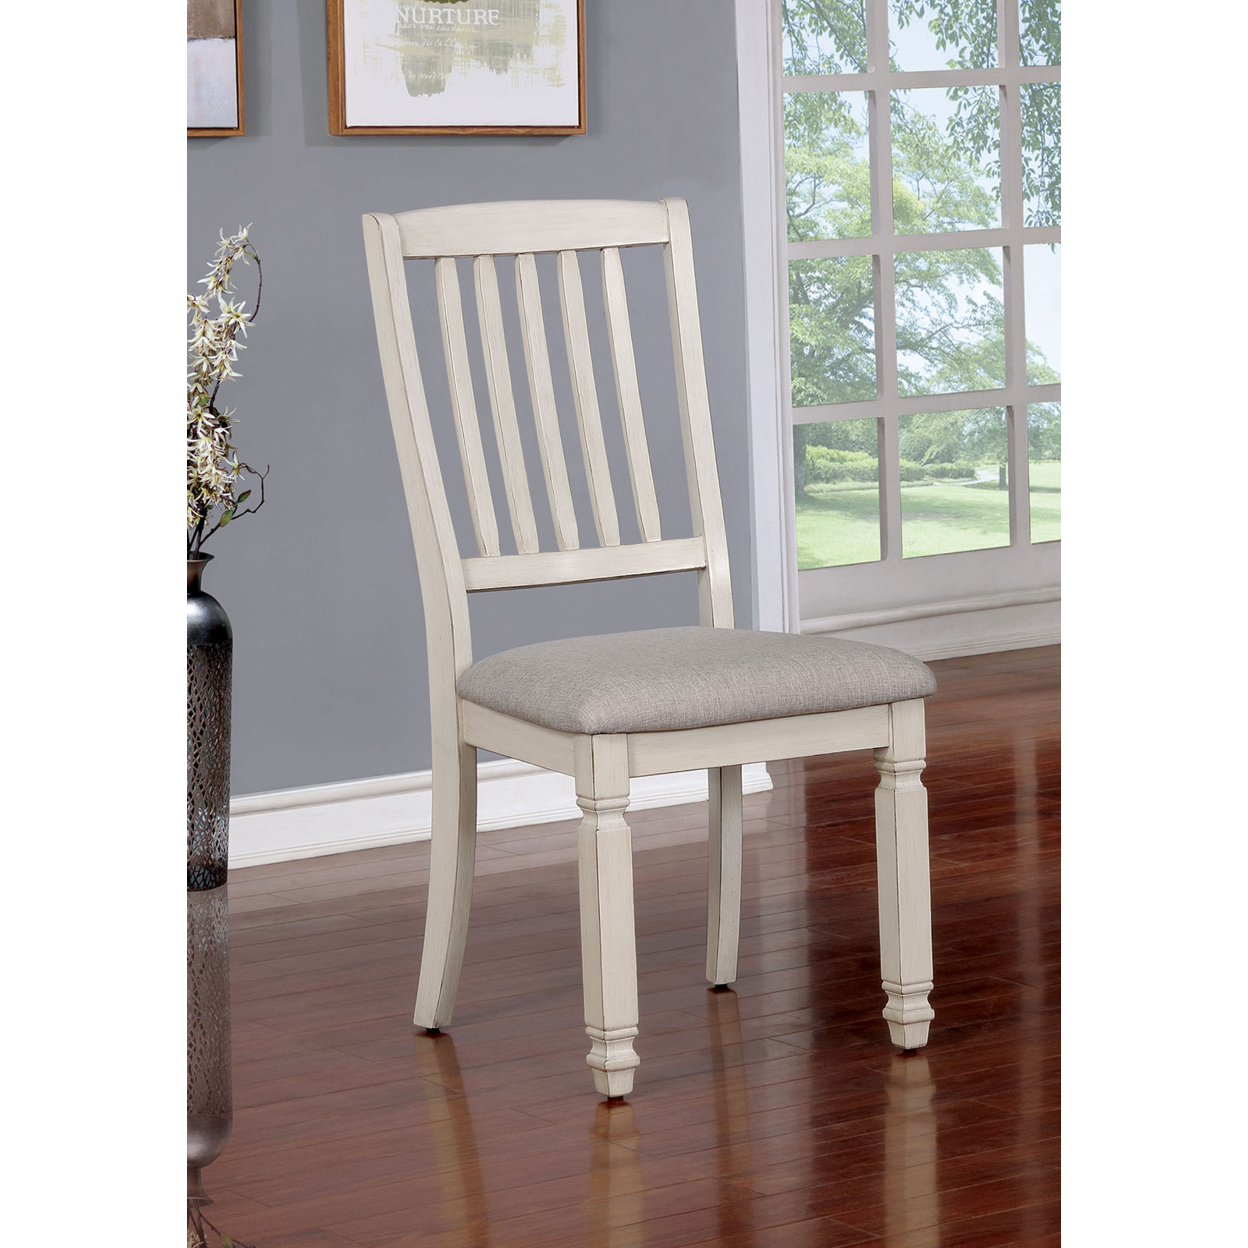 Solid Wood Side Chair With Fabric Padded Seat, Pack Of Two, Antique White And Gray- Saltoro Sherpi